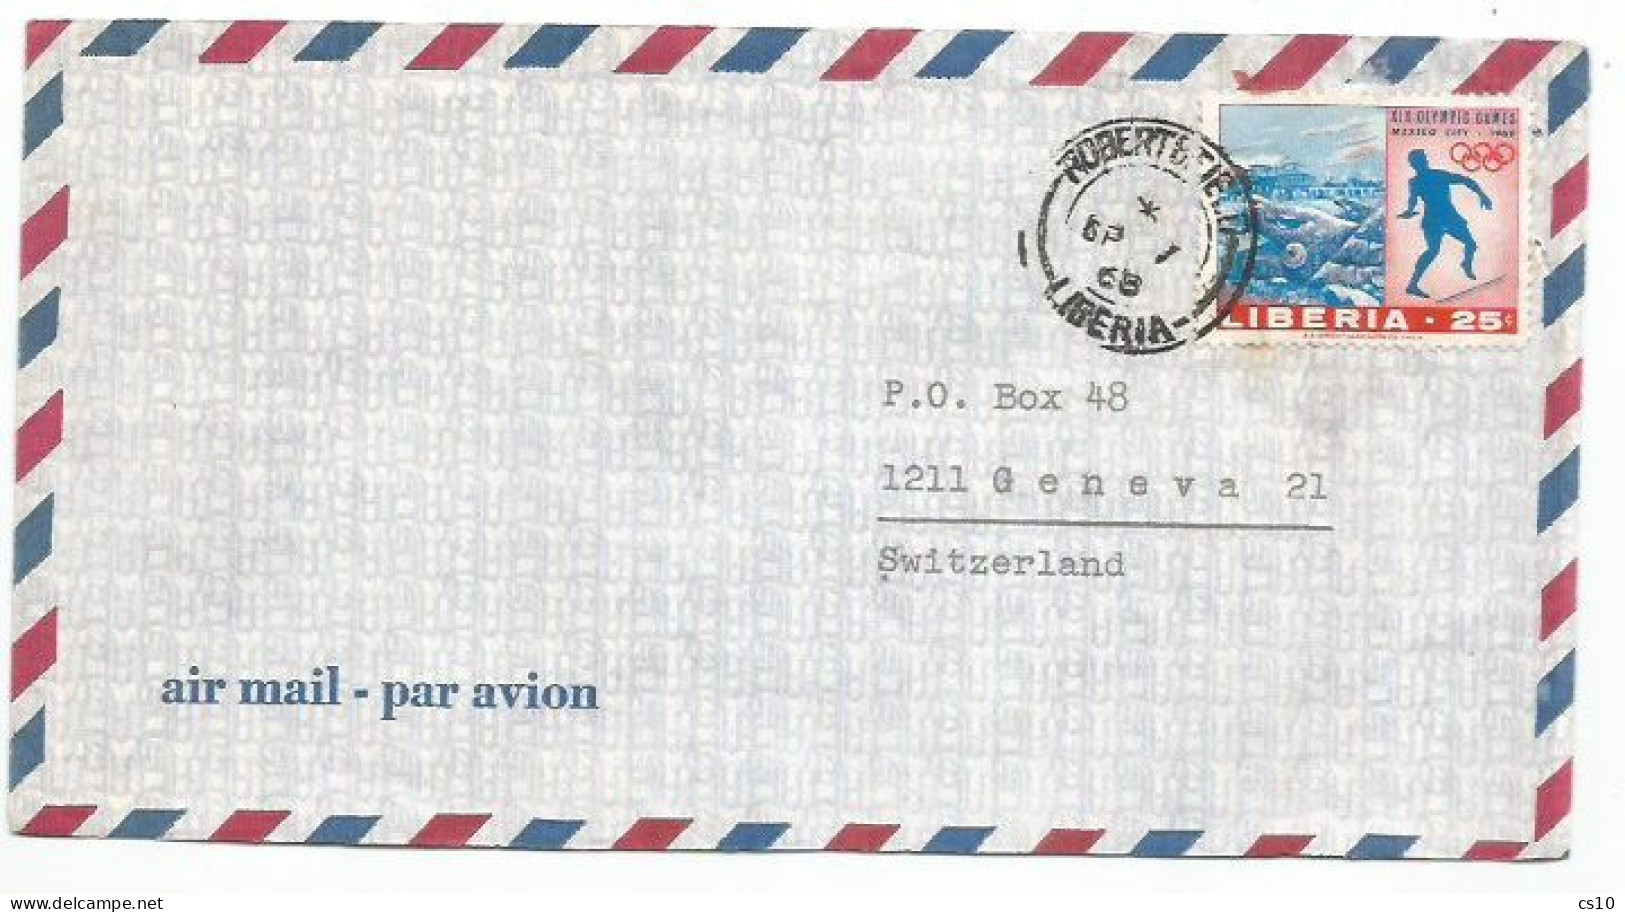 Liberia Airmail Cover Robertsfield 7sep1968 X Suisse With Olympic Games Mexico 1968 C.25 Discus Throw Solo Franking - Atletismo